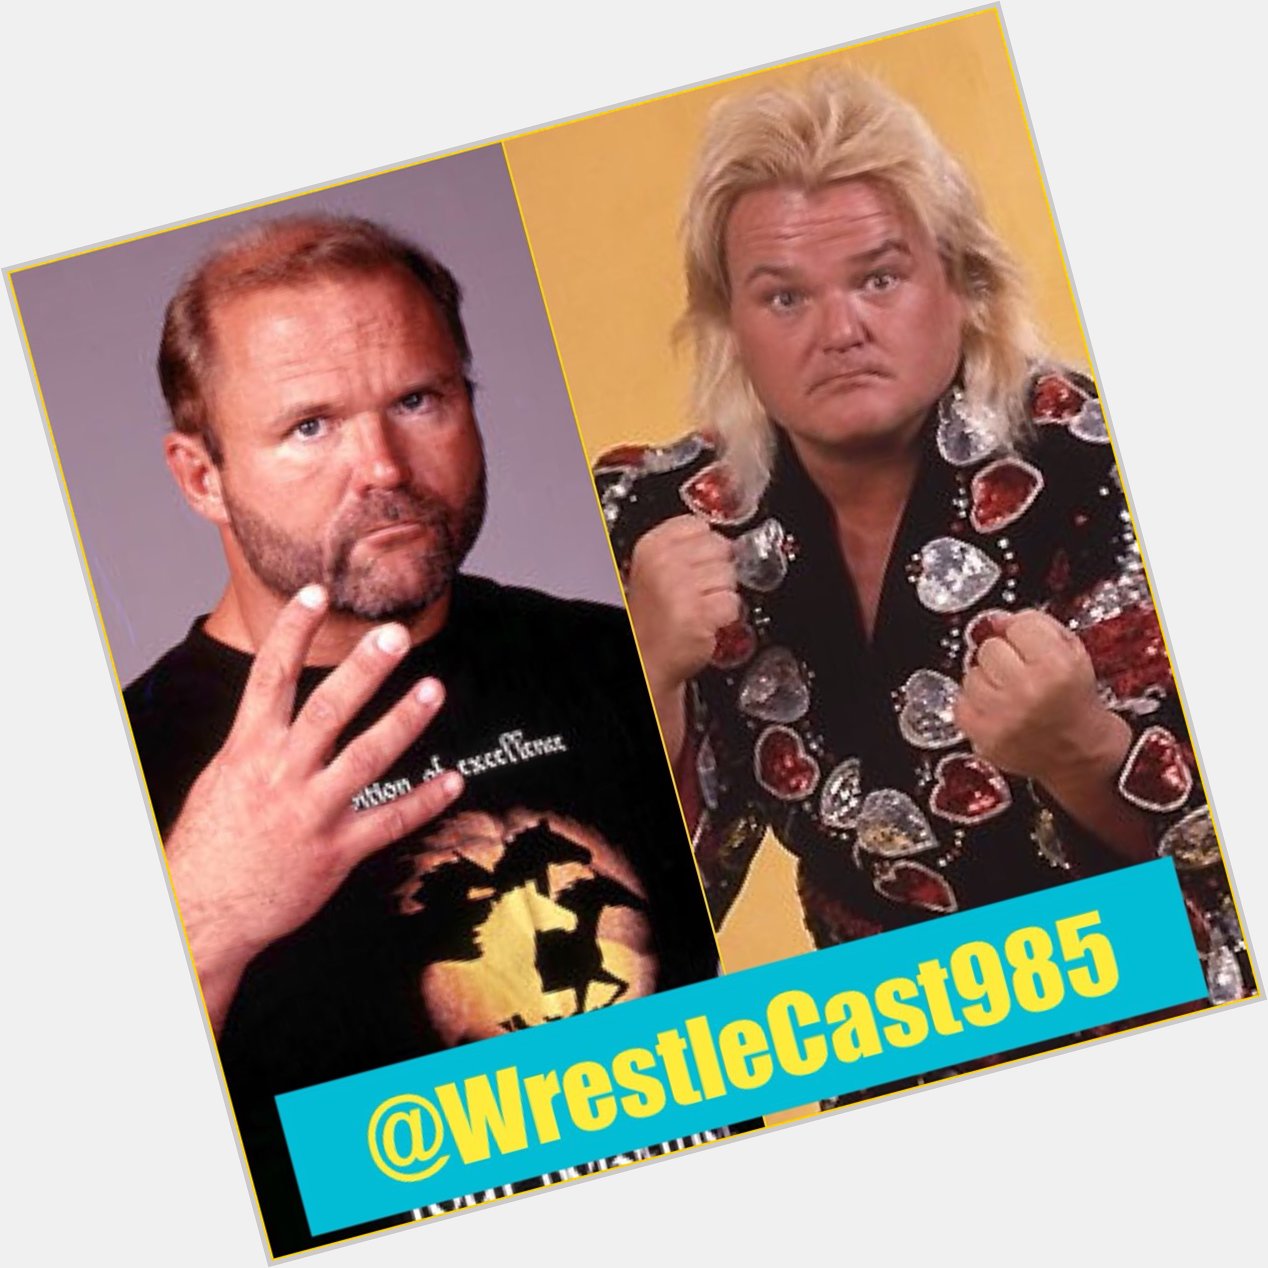 Happy Birthday to a pair of Hall of Famers! 

Arn Anderson (60) 

and

Greg The Hammer Valentine (67) 